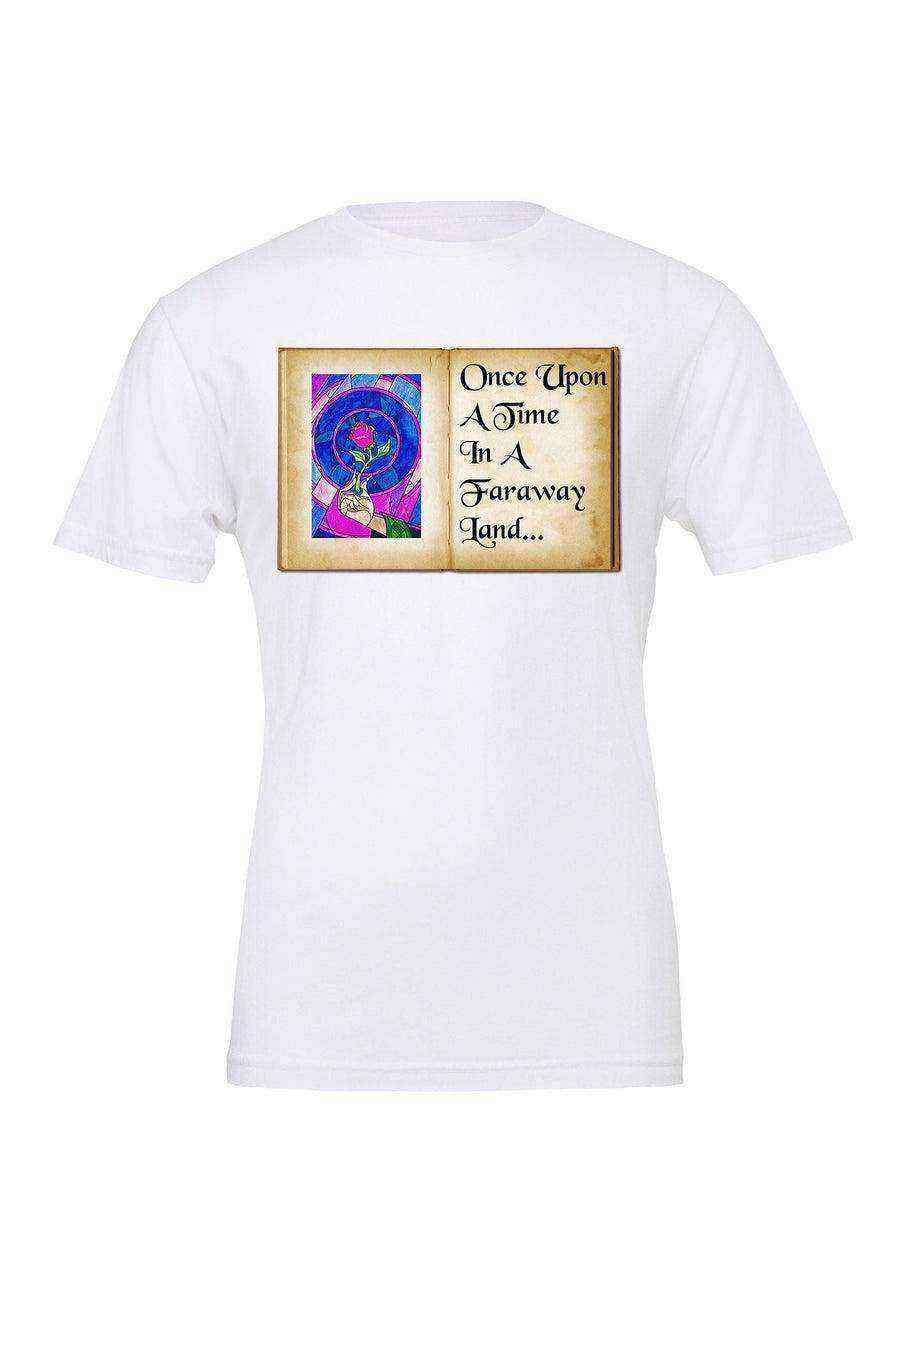 Beauty and the Beast Tee | Once Upon A Time Shirt - Dylan's Tees